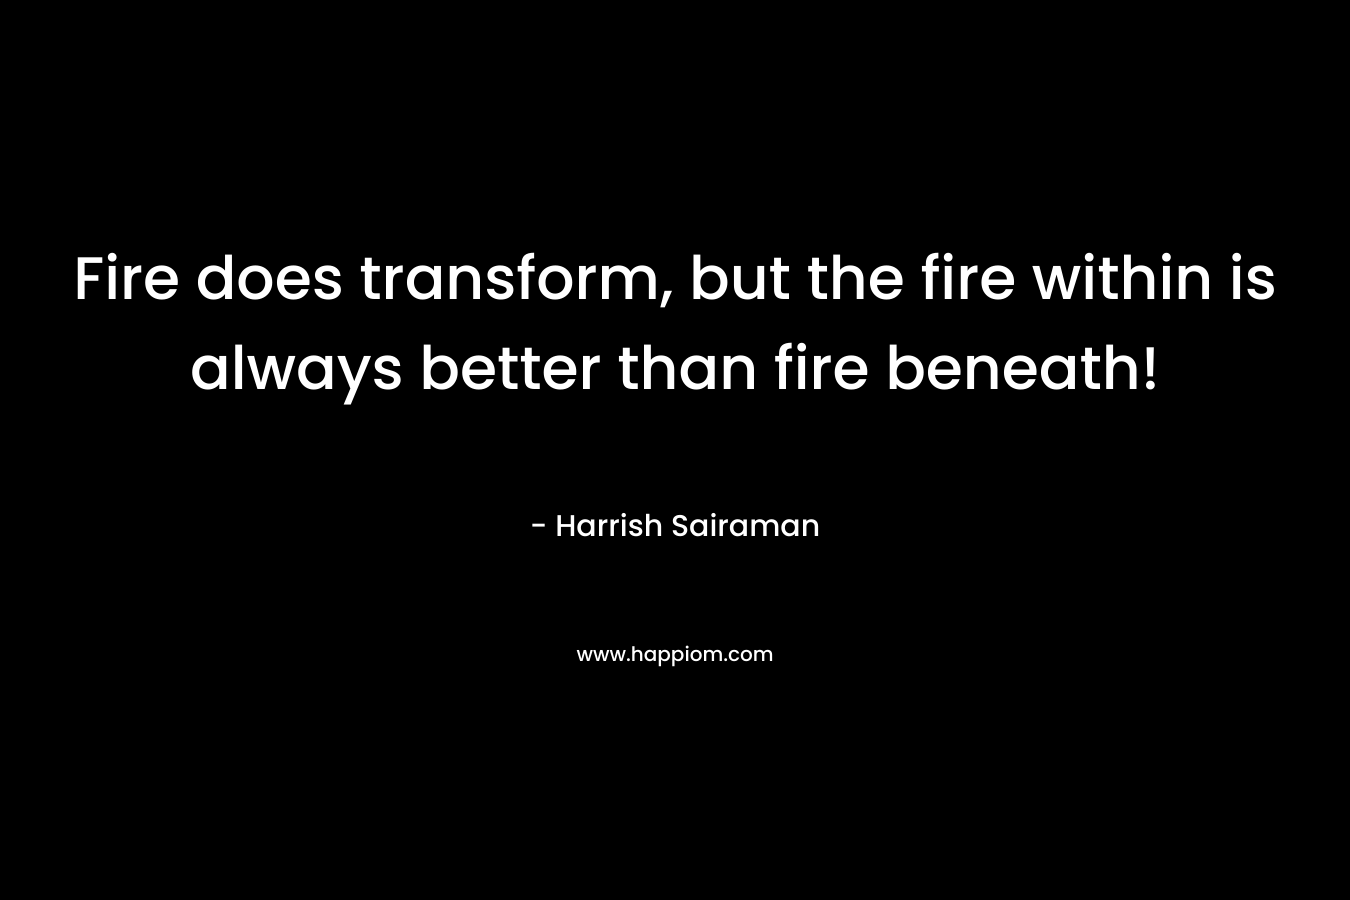 Fire does transform, but the fire within is always better than fire beneath!